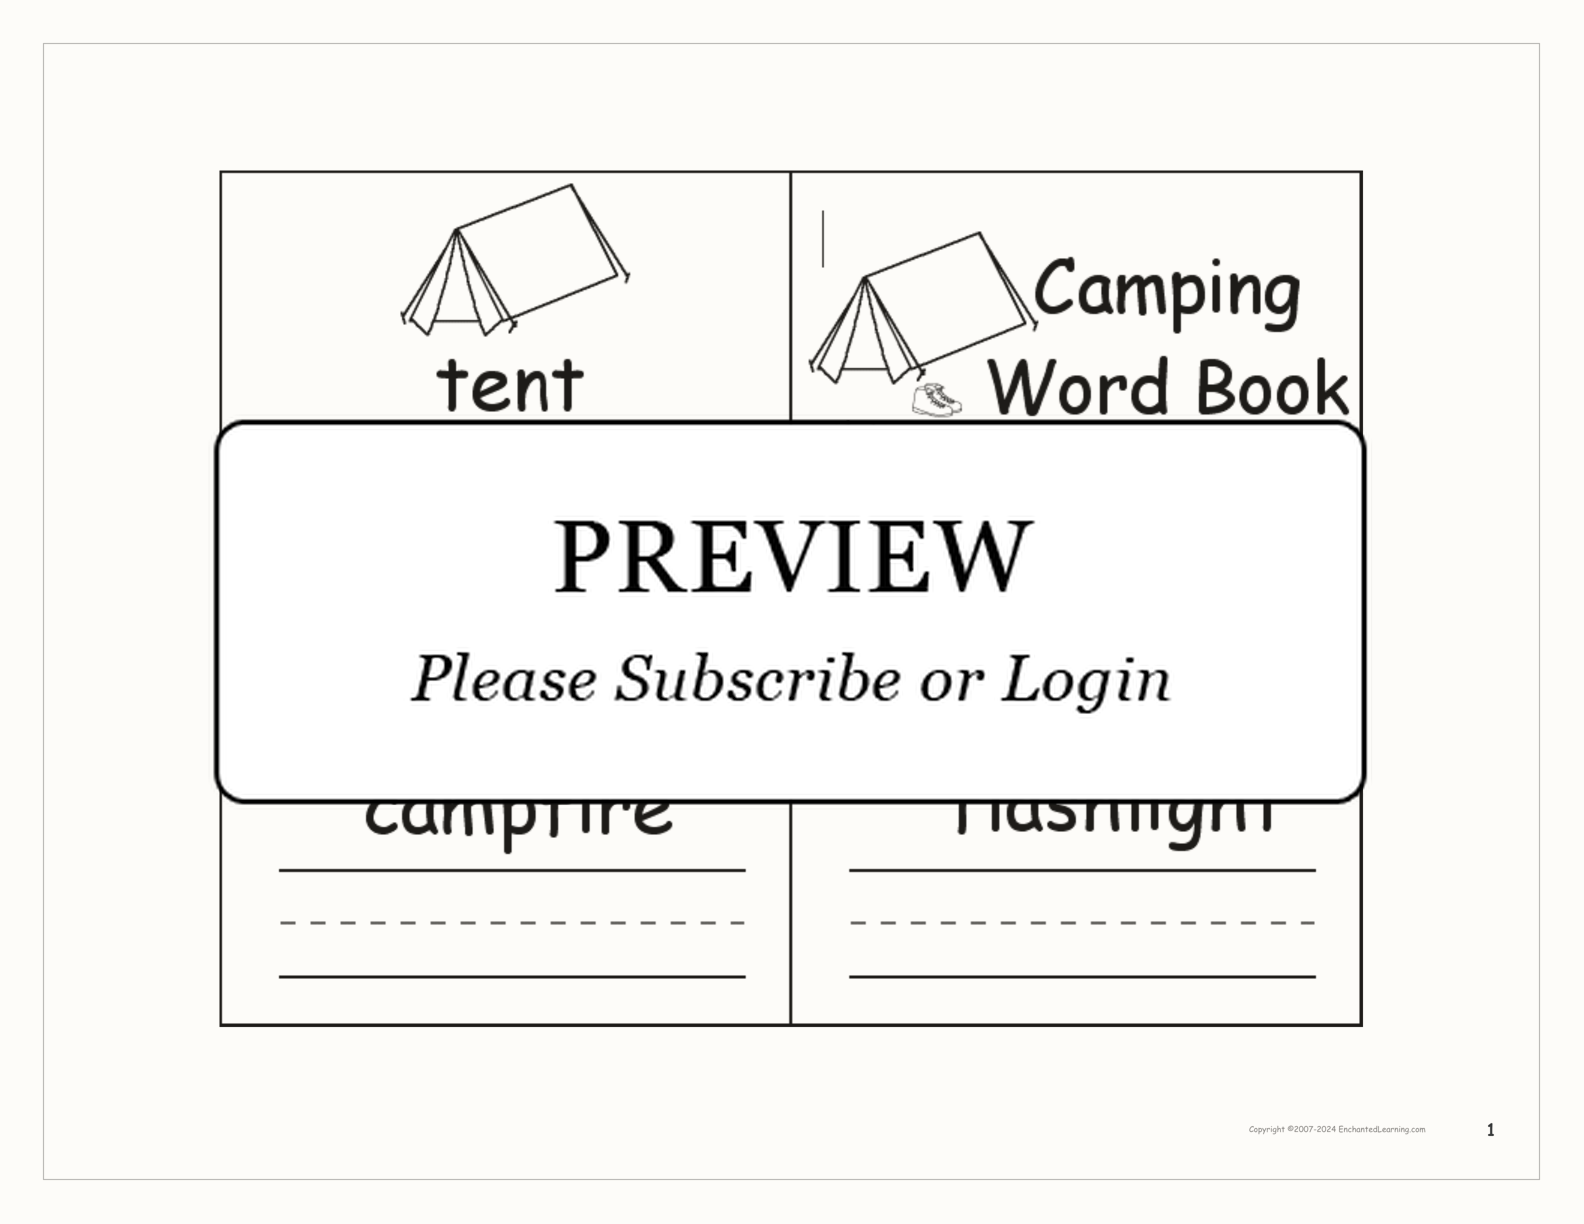 Camping Word Book interactive worksheet page 1